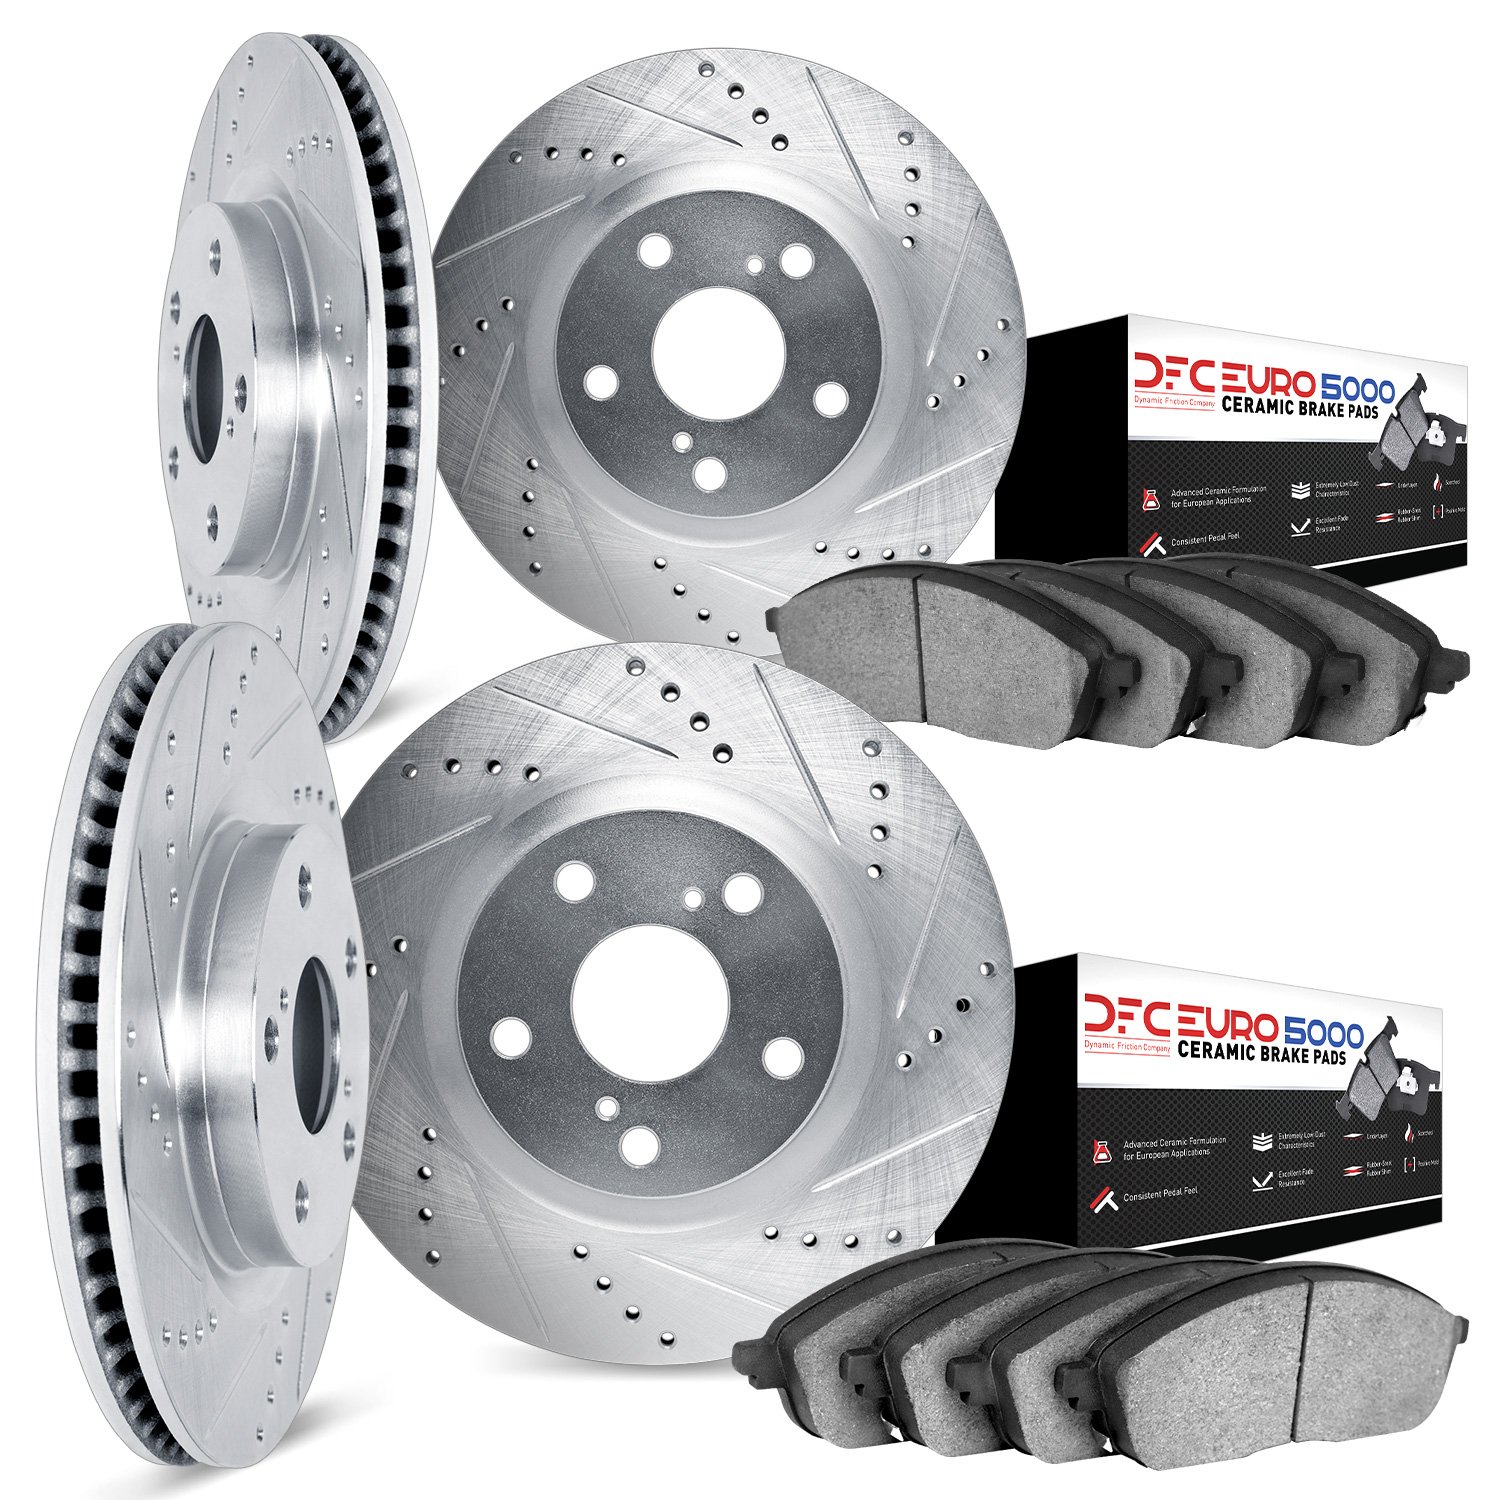 7604-31011 Drilled/Slotted Brake Rotors w/5000 Euro Ceramic Brake Pads Kit [Silver], 1991-1993 BMW, Position: Front and Rear